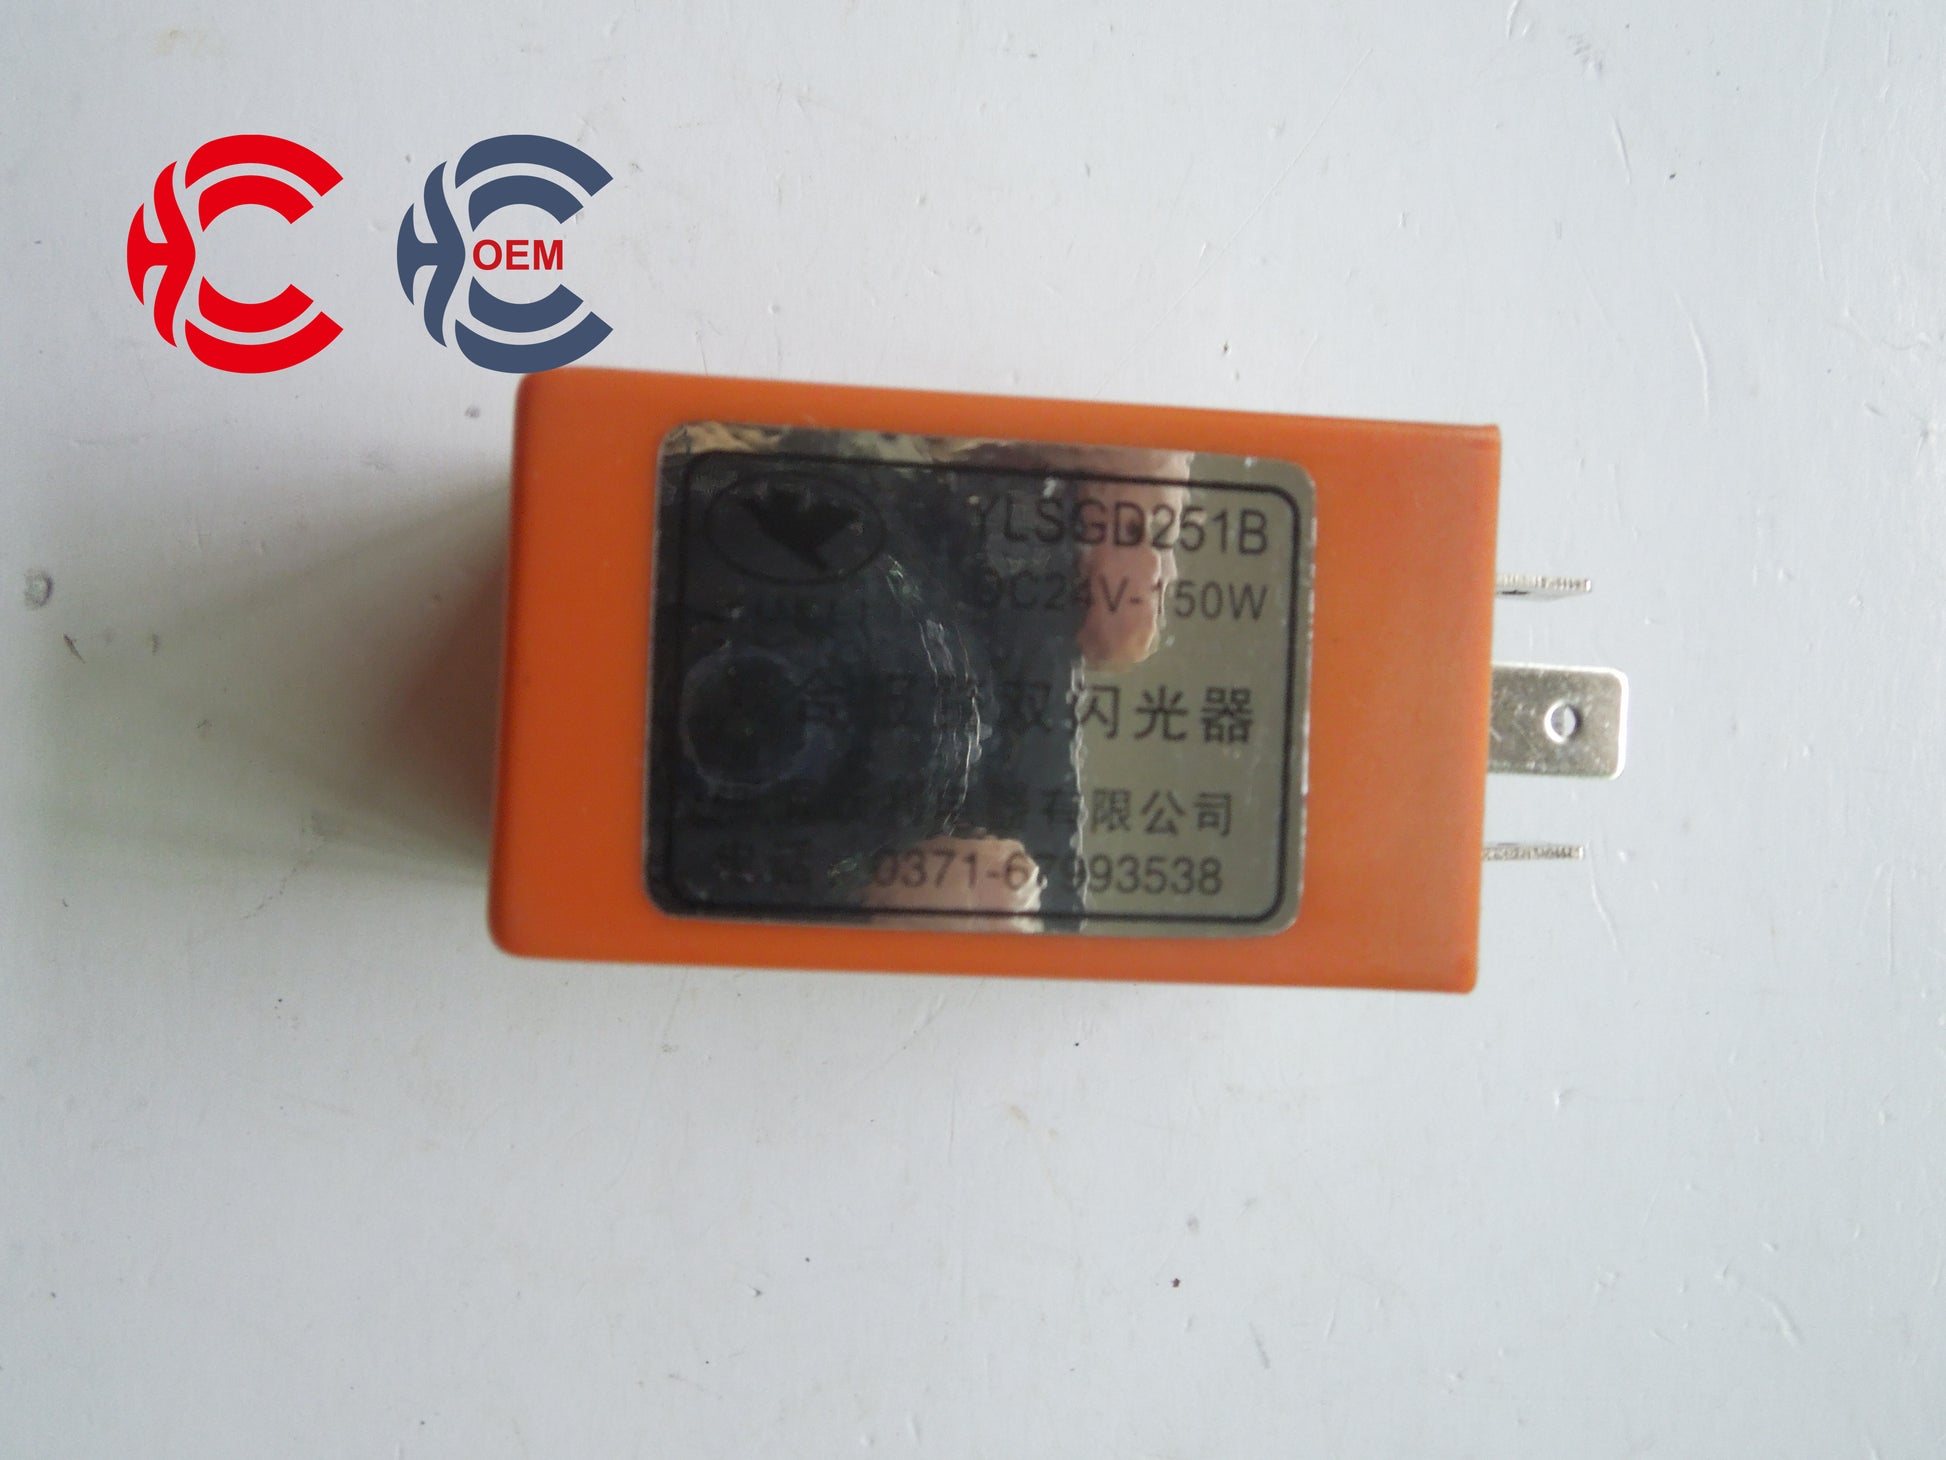 OEM: YLSGD-251BMaterial: ABS Color: black Origin: Made in ChinaWeight: 50gPacking List: 1* Flash Relay More ServiceWe can provide OEM Manufacturing serviceWe can Be your one-step solution for Auto PartsWe can provide technical scheme for you Feel Free to Contact Us, We will get back to you as soon as possible.